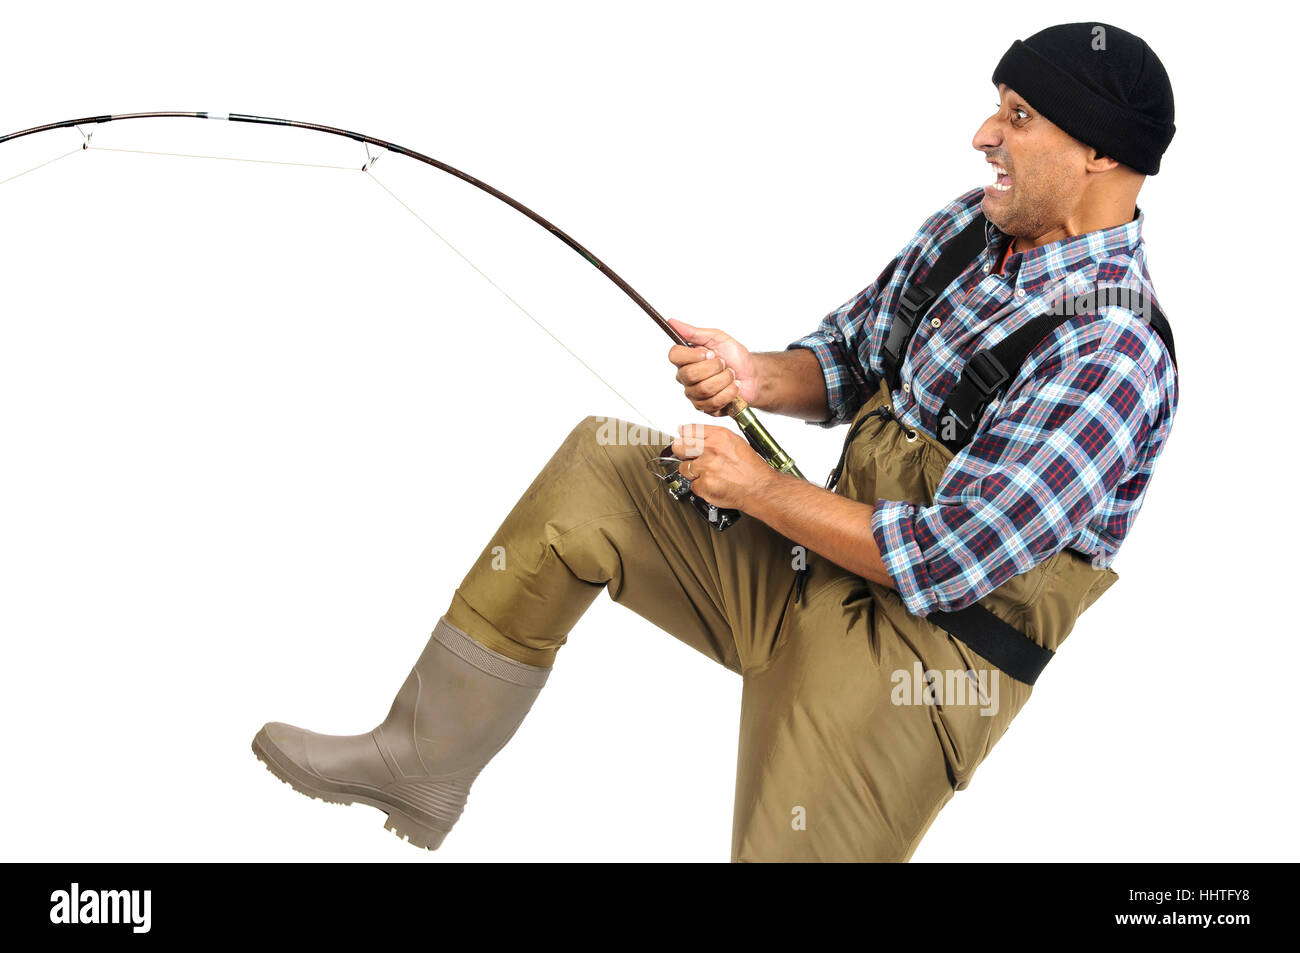 fish, adult, bait, fisherman, equipment, adults, catching, laugh, laughs  Stock Photo - Alamy